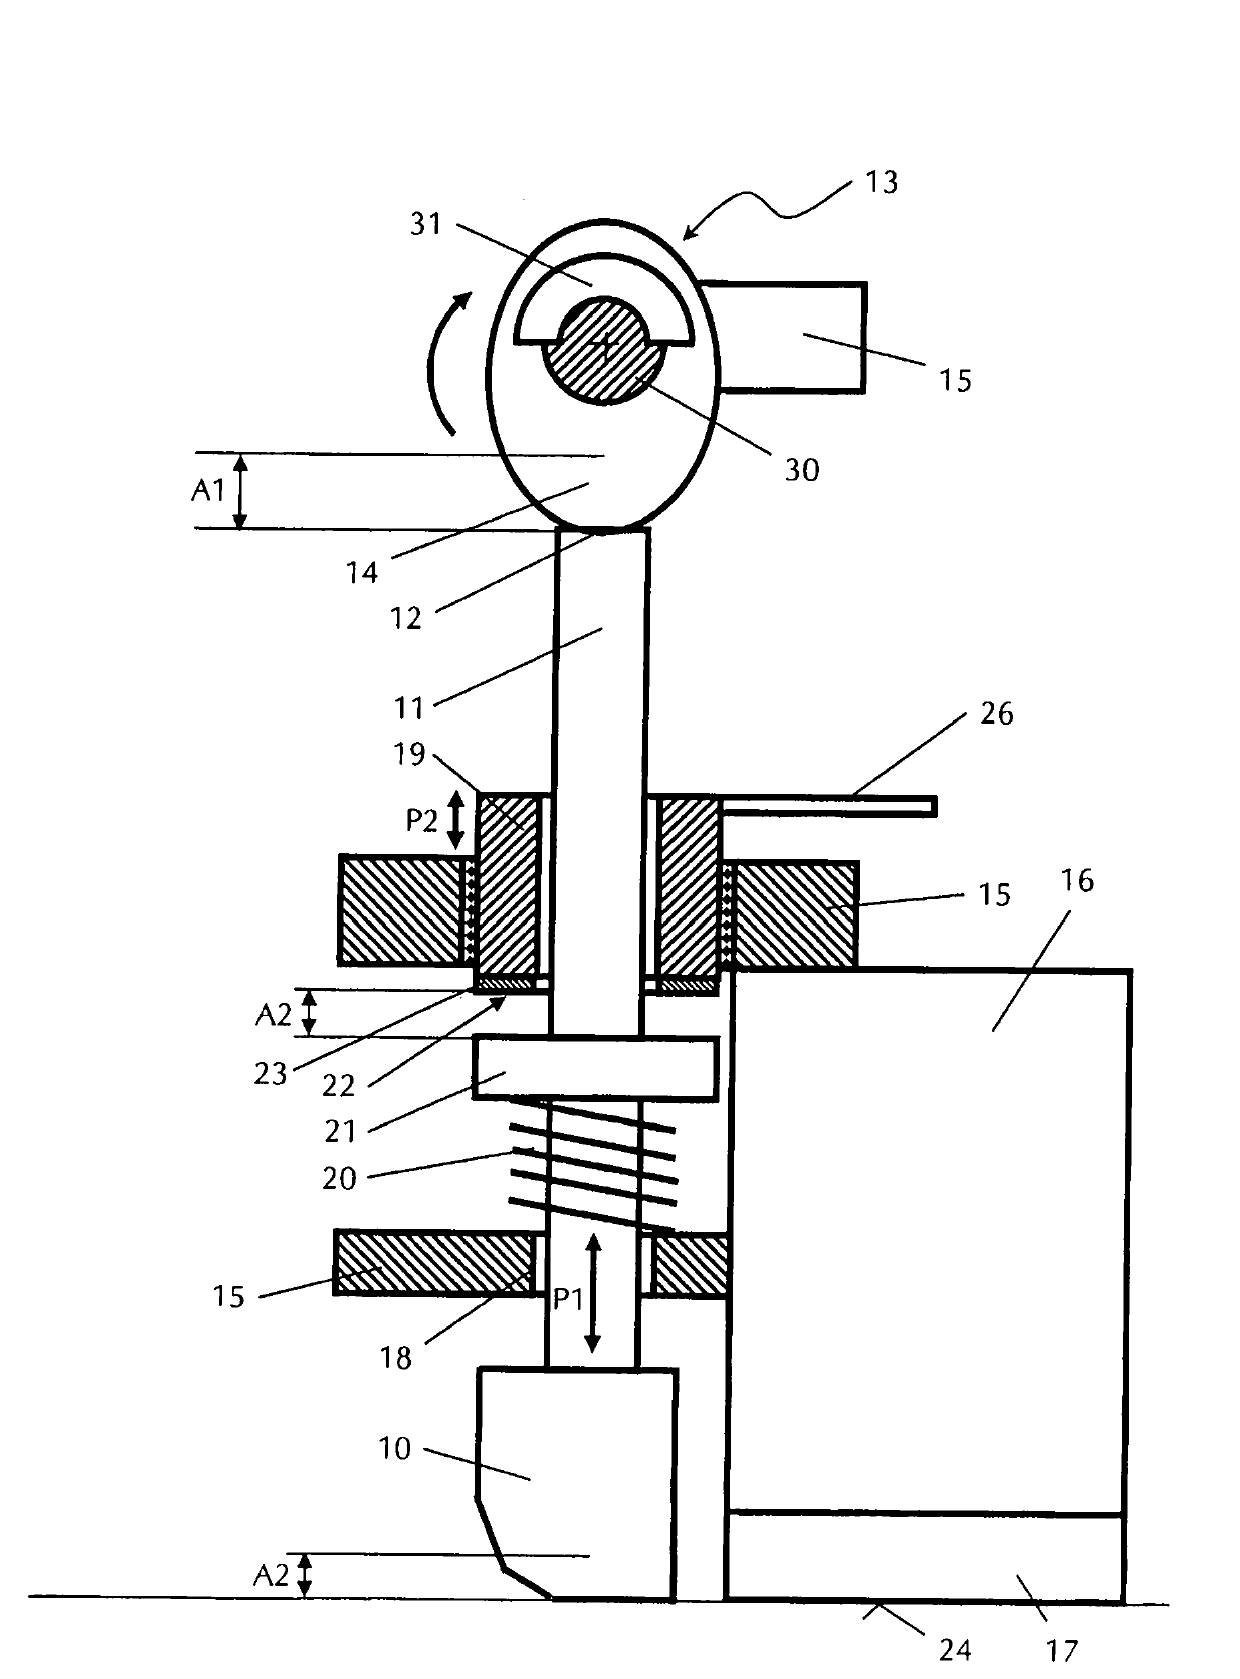 Method and apparatus for amplitude adjustment of a stamping bar of a road finisher